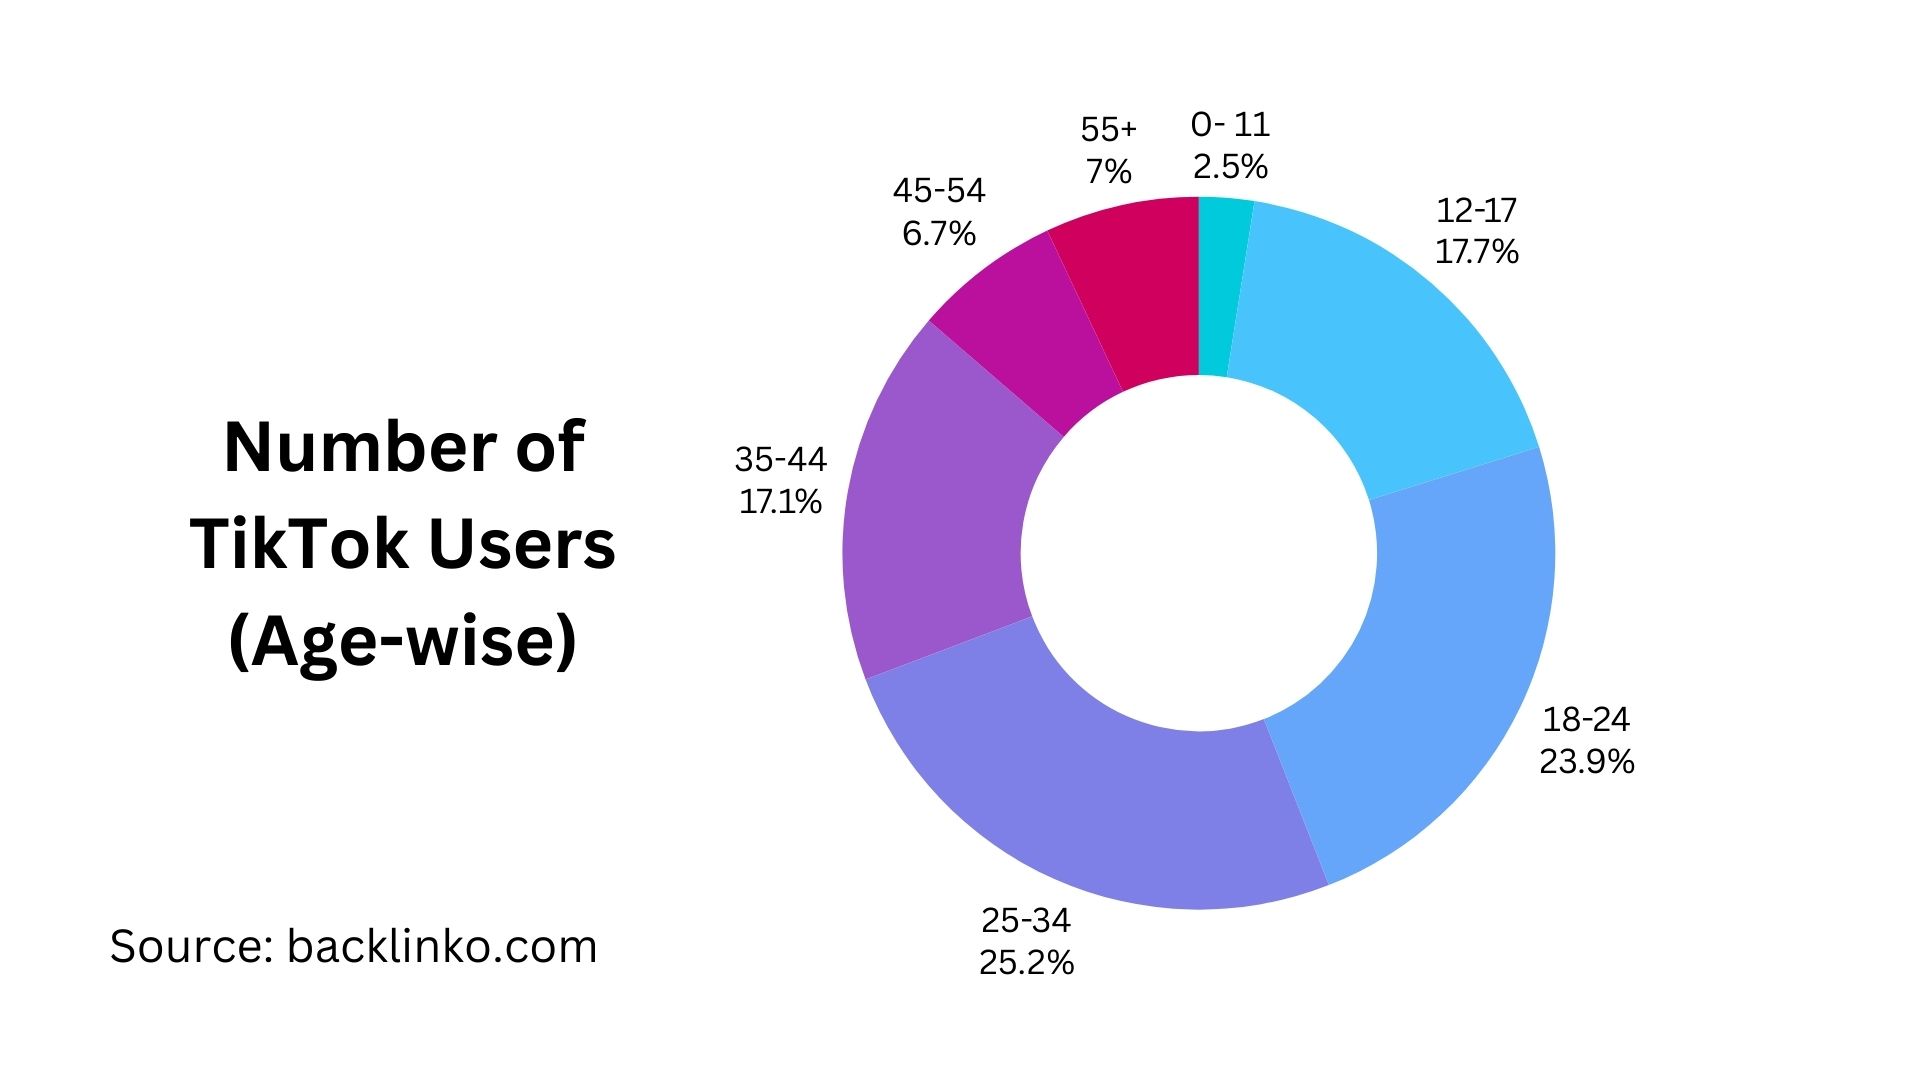 (Alt Text- Images show Pie chart on the Number of TikTok Users Age Wise categorization. 2.5% of users are Age 11 or under. 17.7% of users are age 12-17. 23.9% of users are age 18-24. 25.2% of users are age 25-34. 17.1% of users are age 35-44. 6.7% of users are age 45-54. 7% of users are age 55+. Source- backlinko.com)